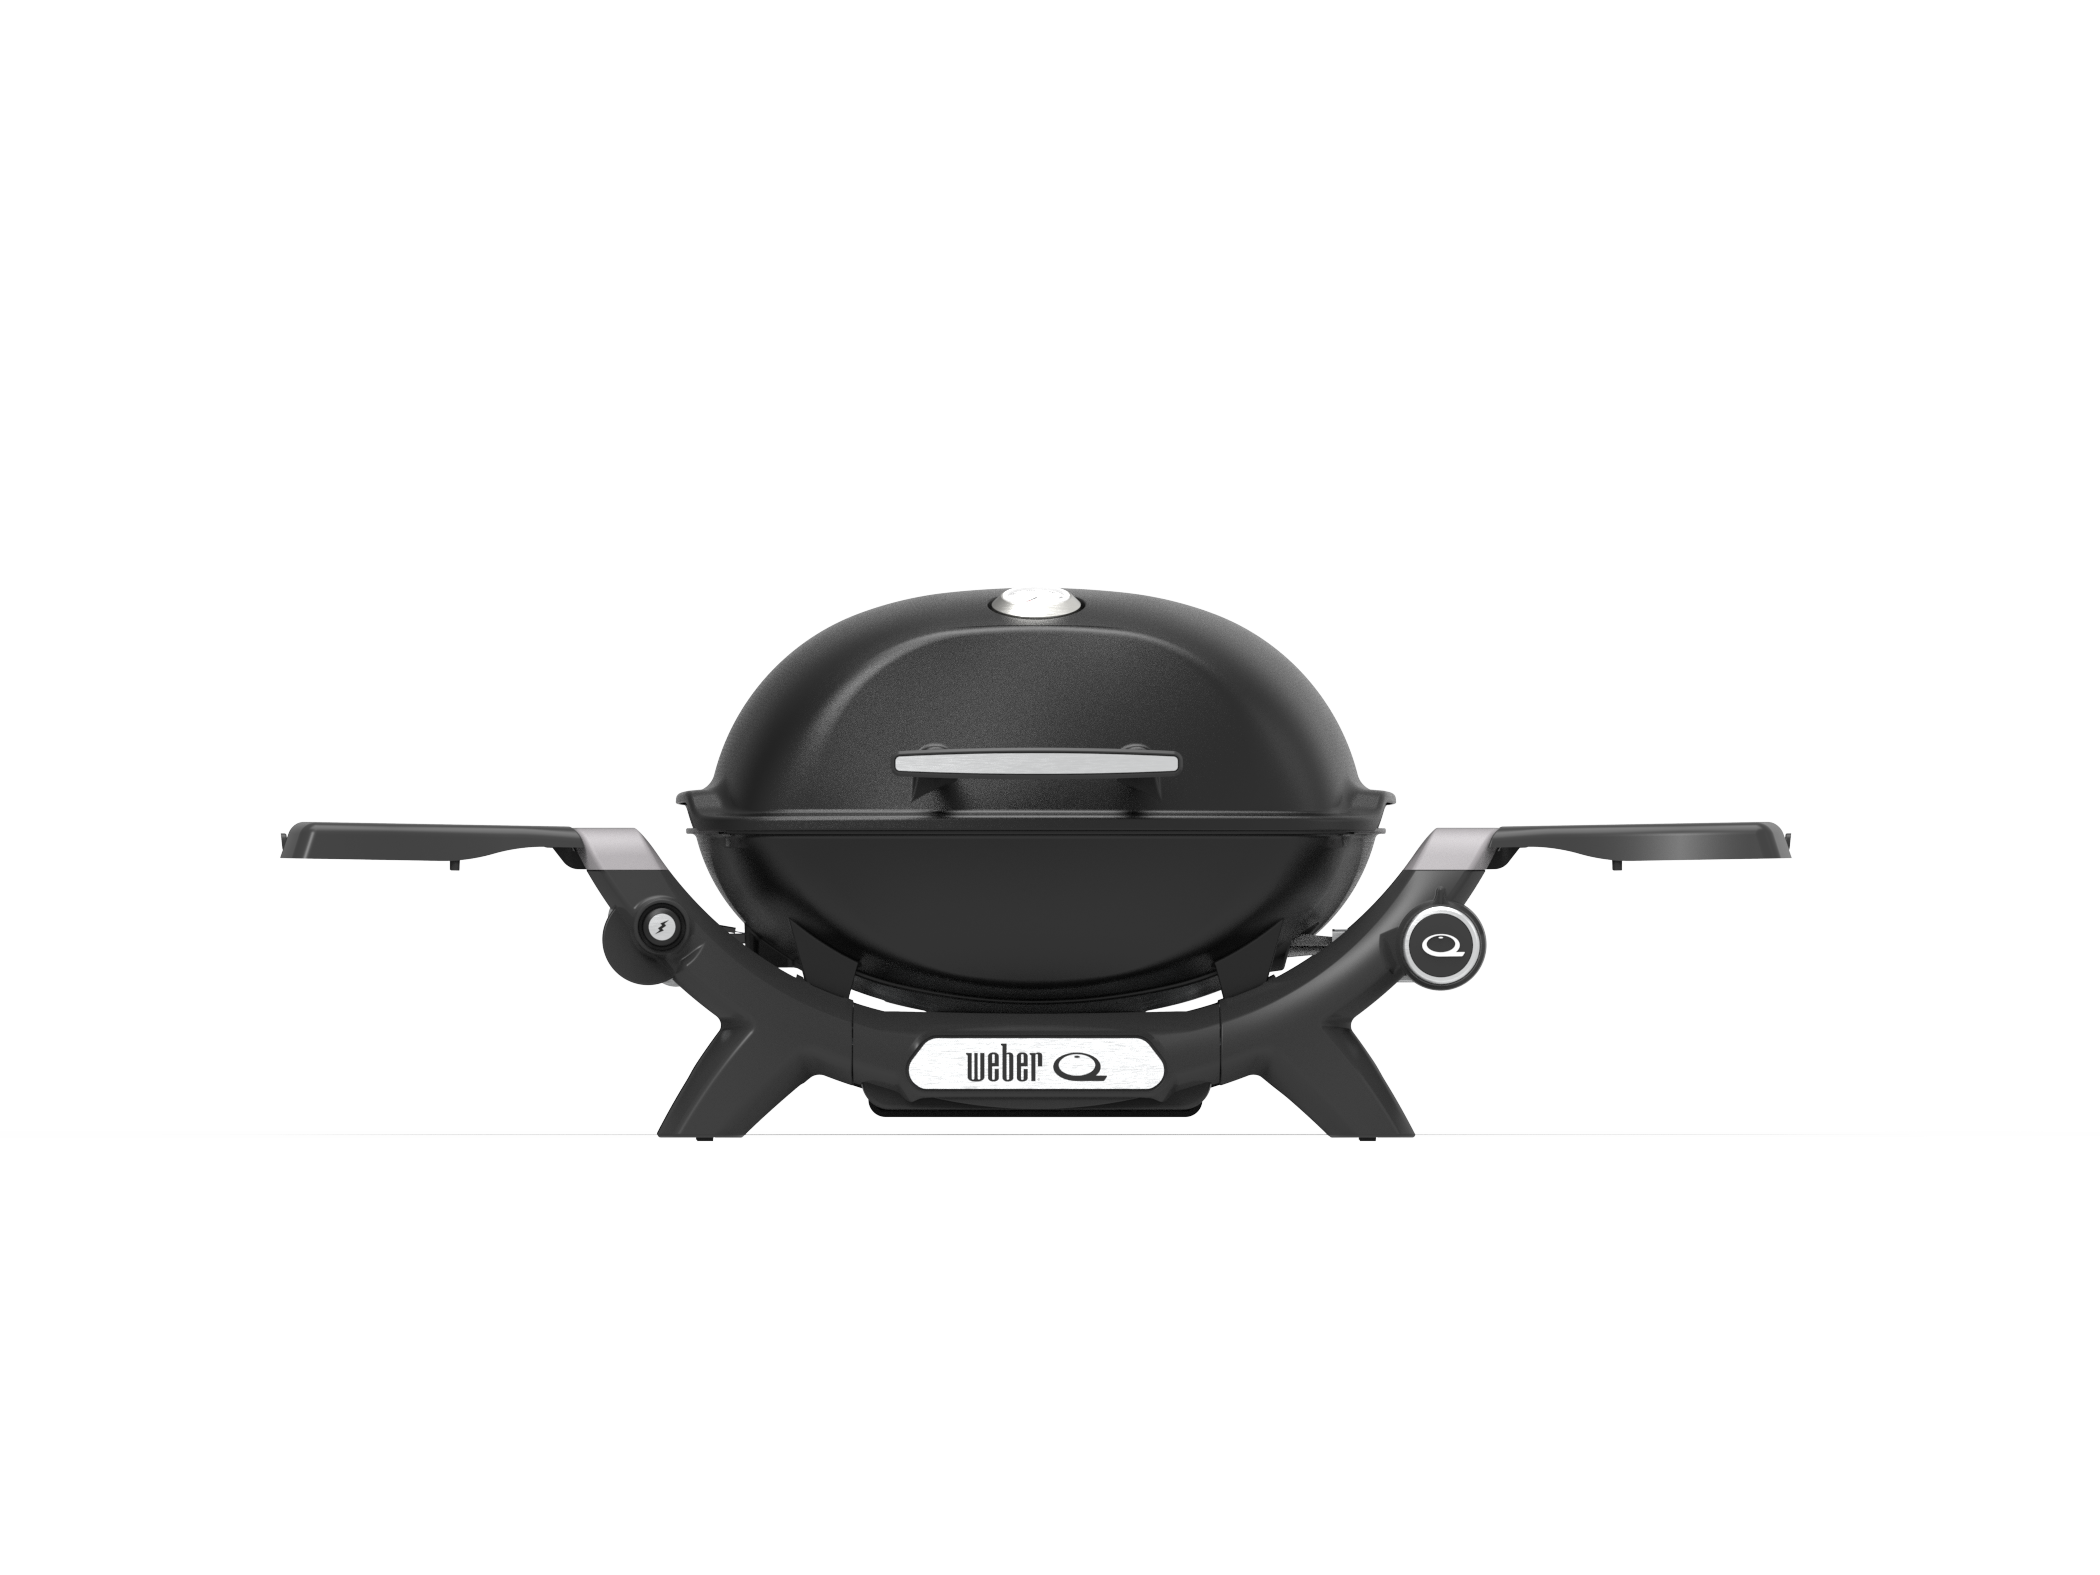 Weber Q1200 N front view in black